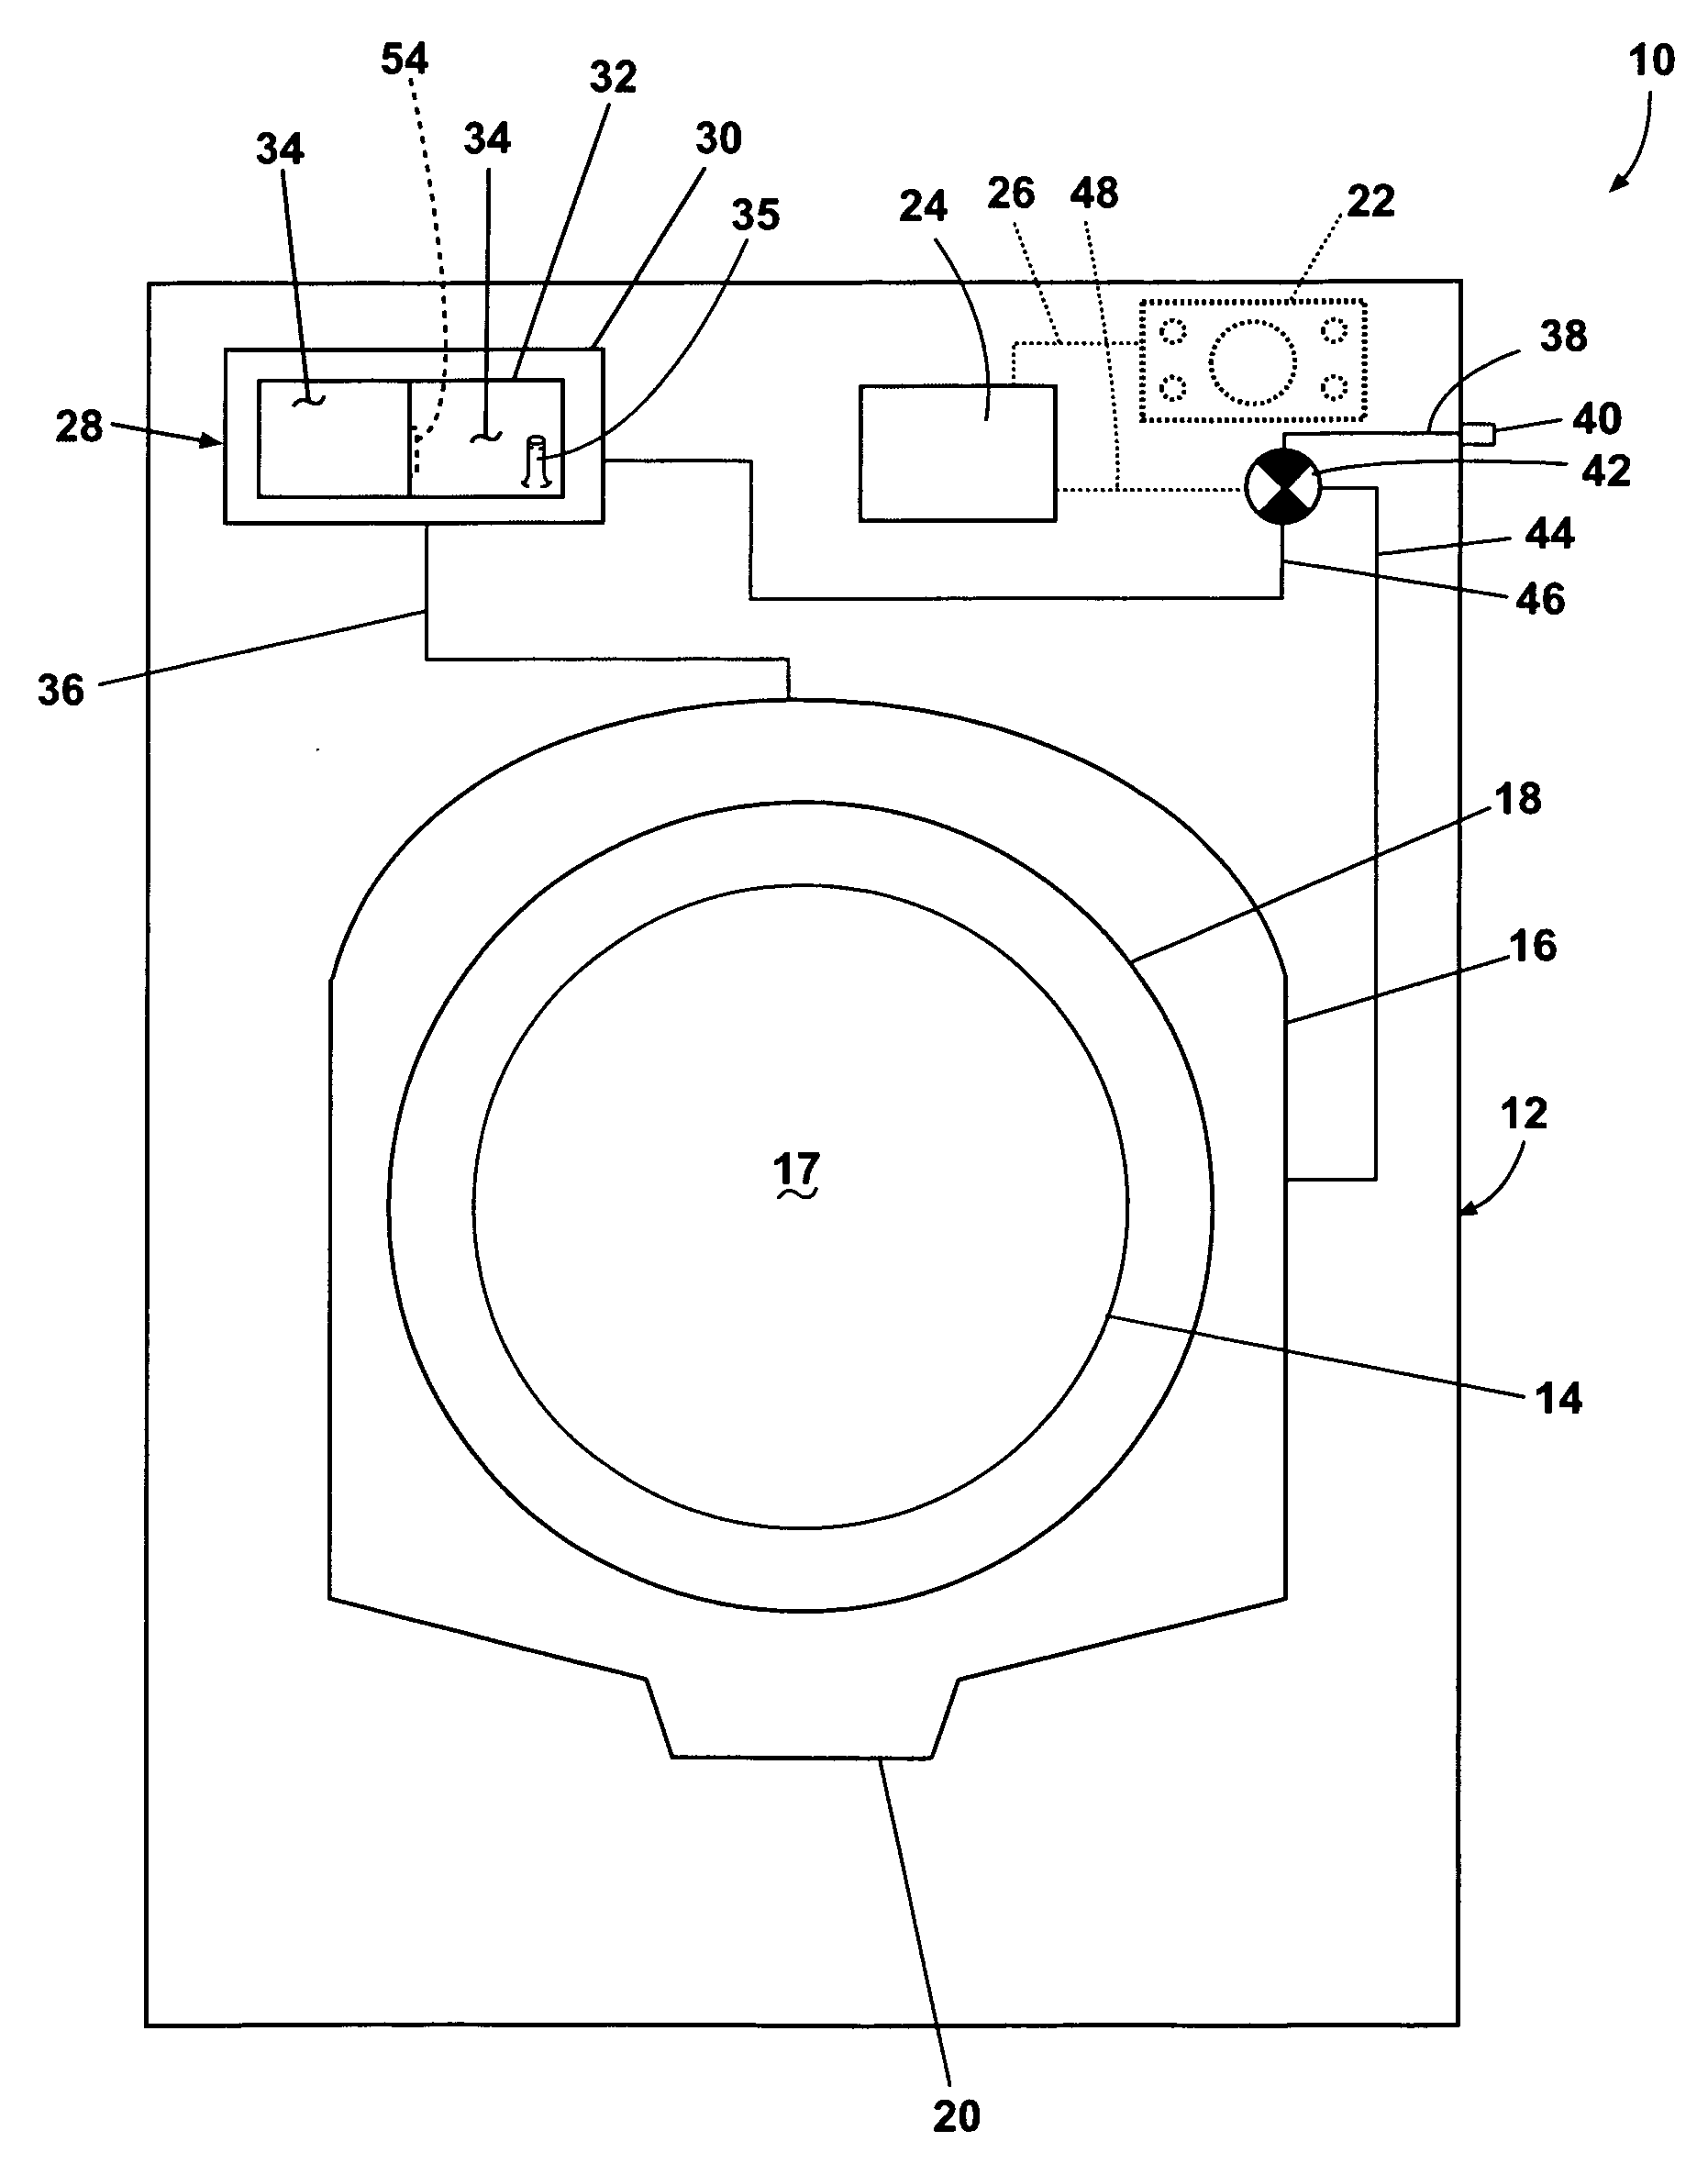 Method for converting a household cleaning appliance with a non-bulk dispensing system to a household cleaning appliance with a bulk dispensing system